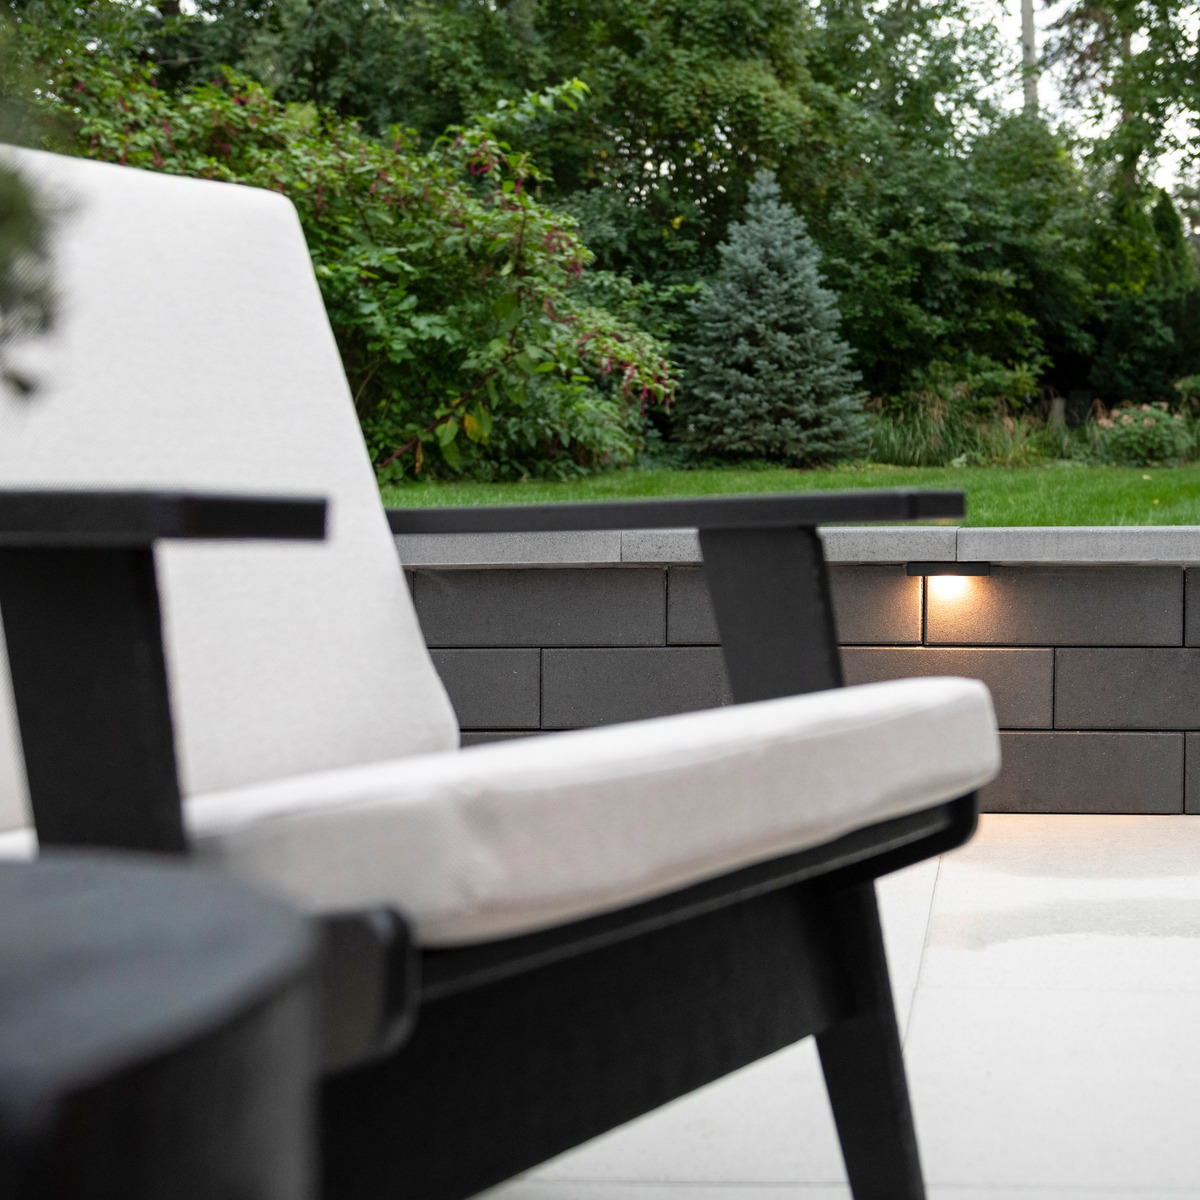 Large concrete paver patio with outdoor seating